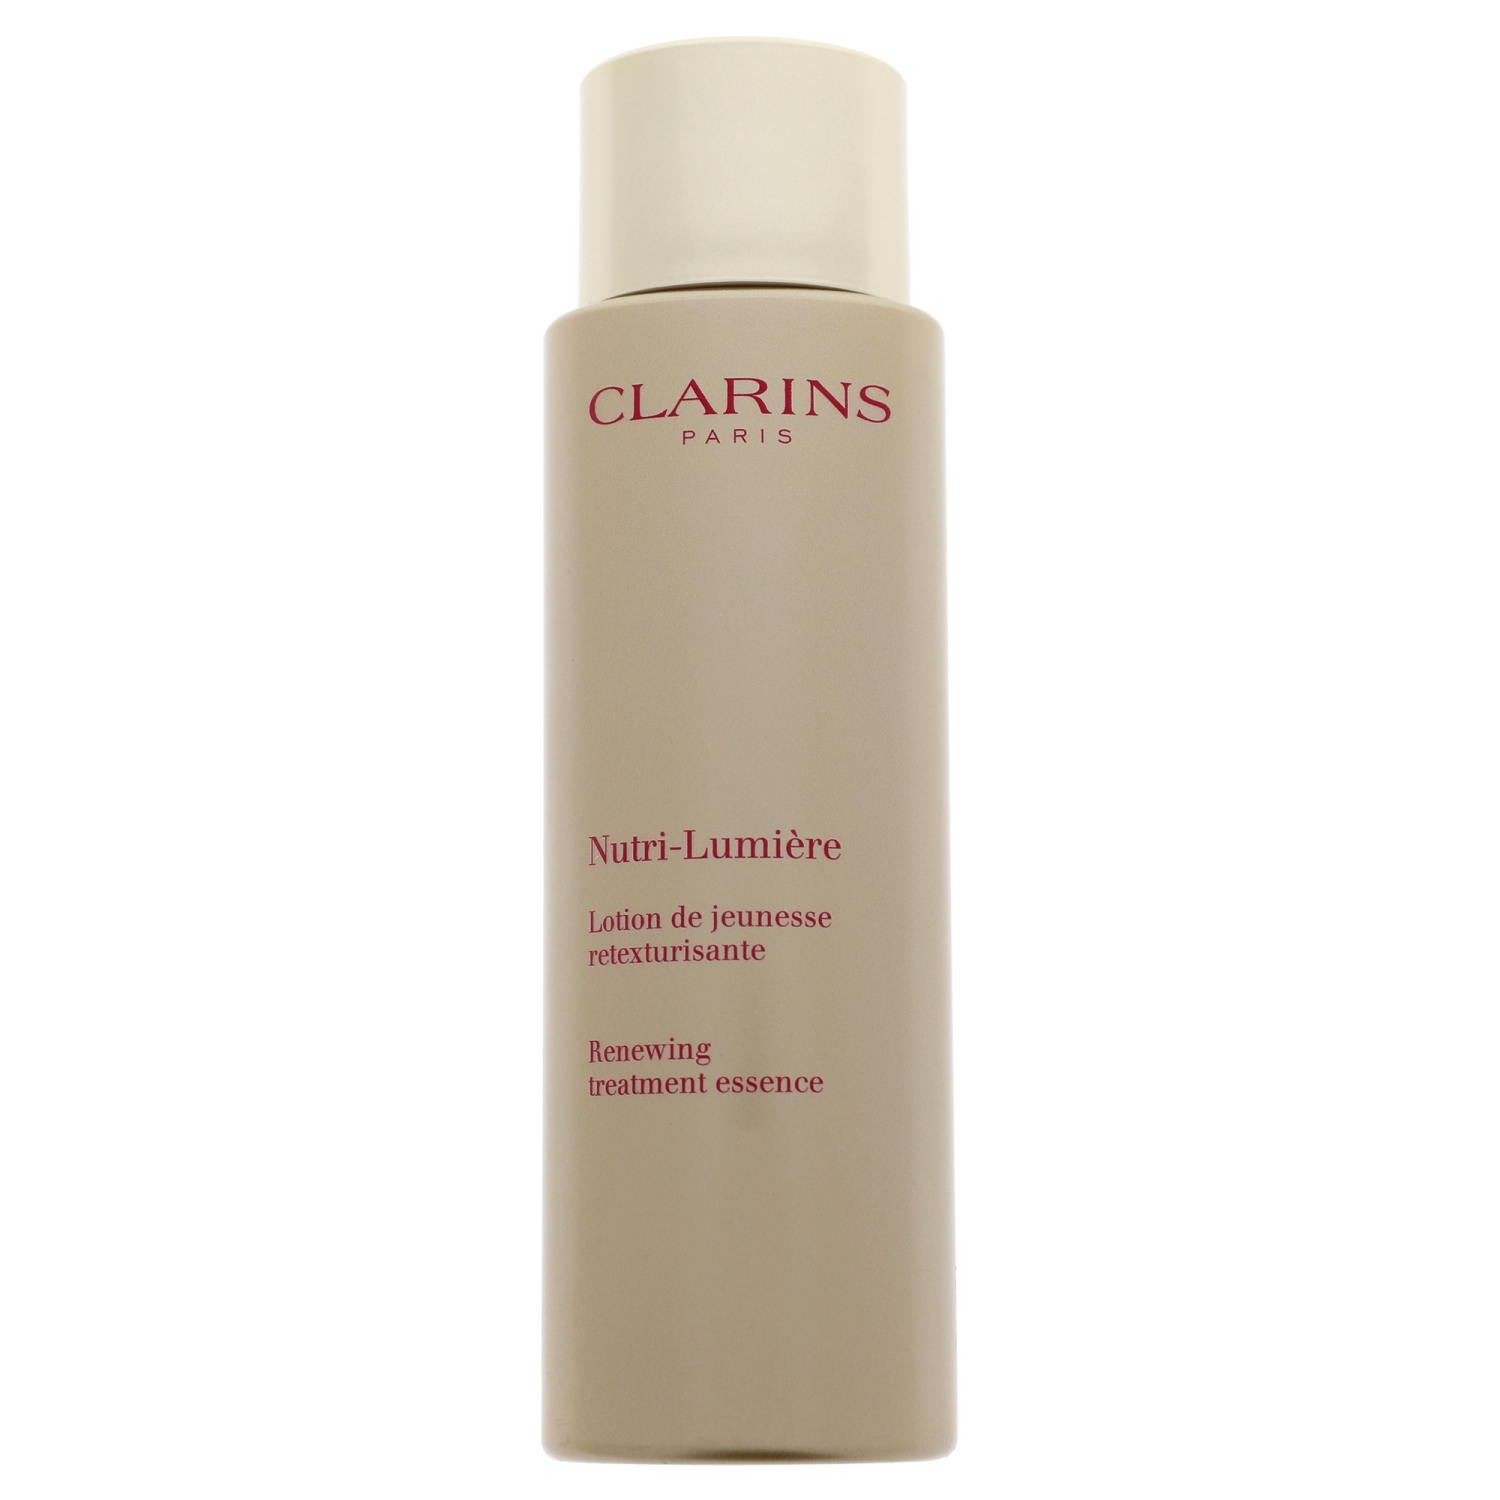 Nutri-Lumiere Renewing Treatment Essence by Clarins for Unisex - 6.7 oz Treatment